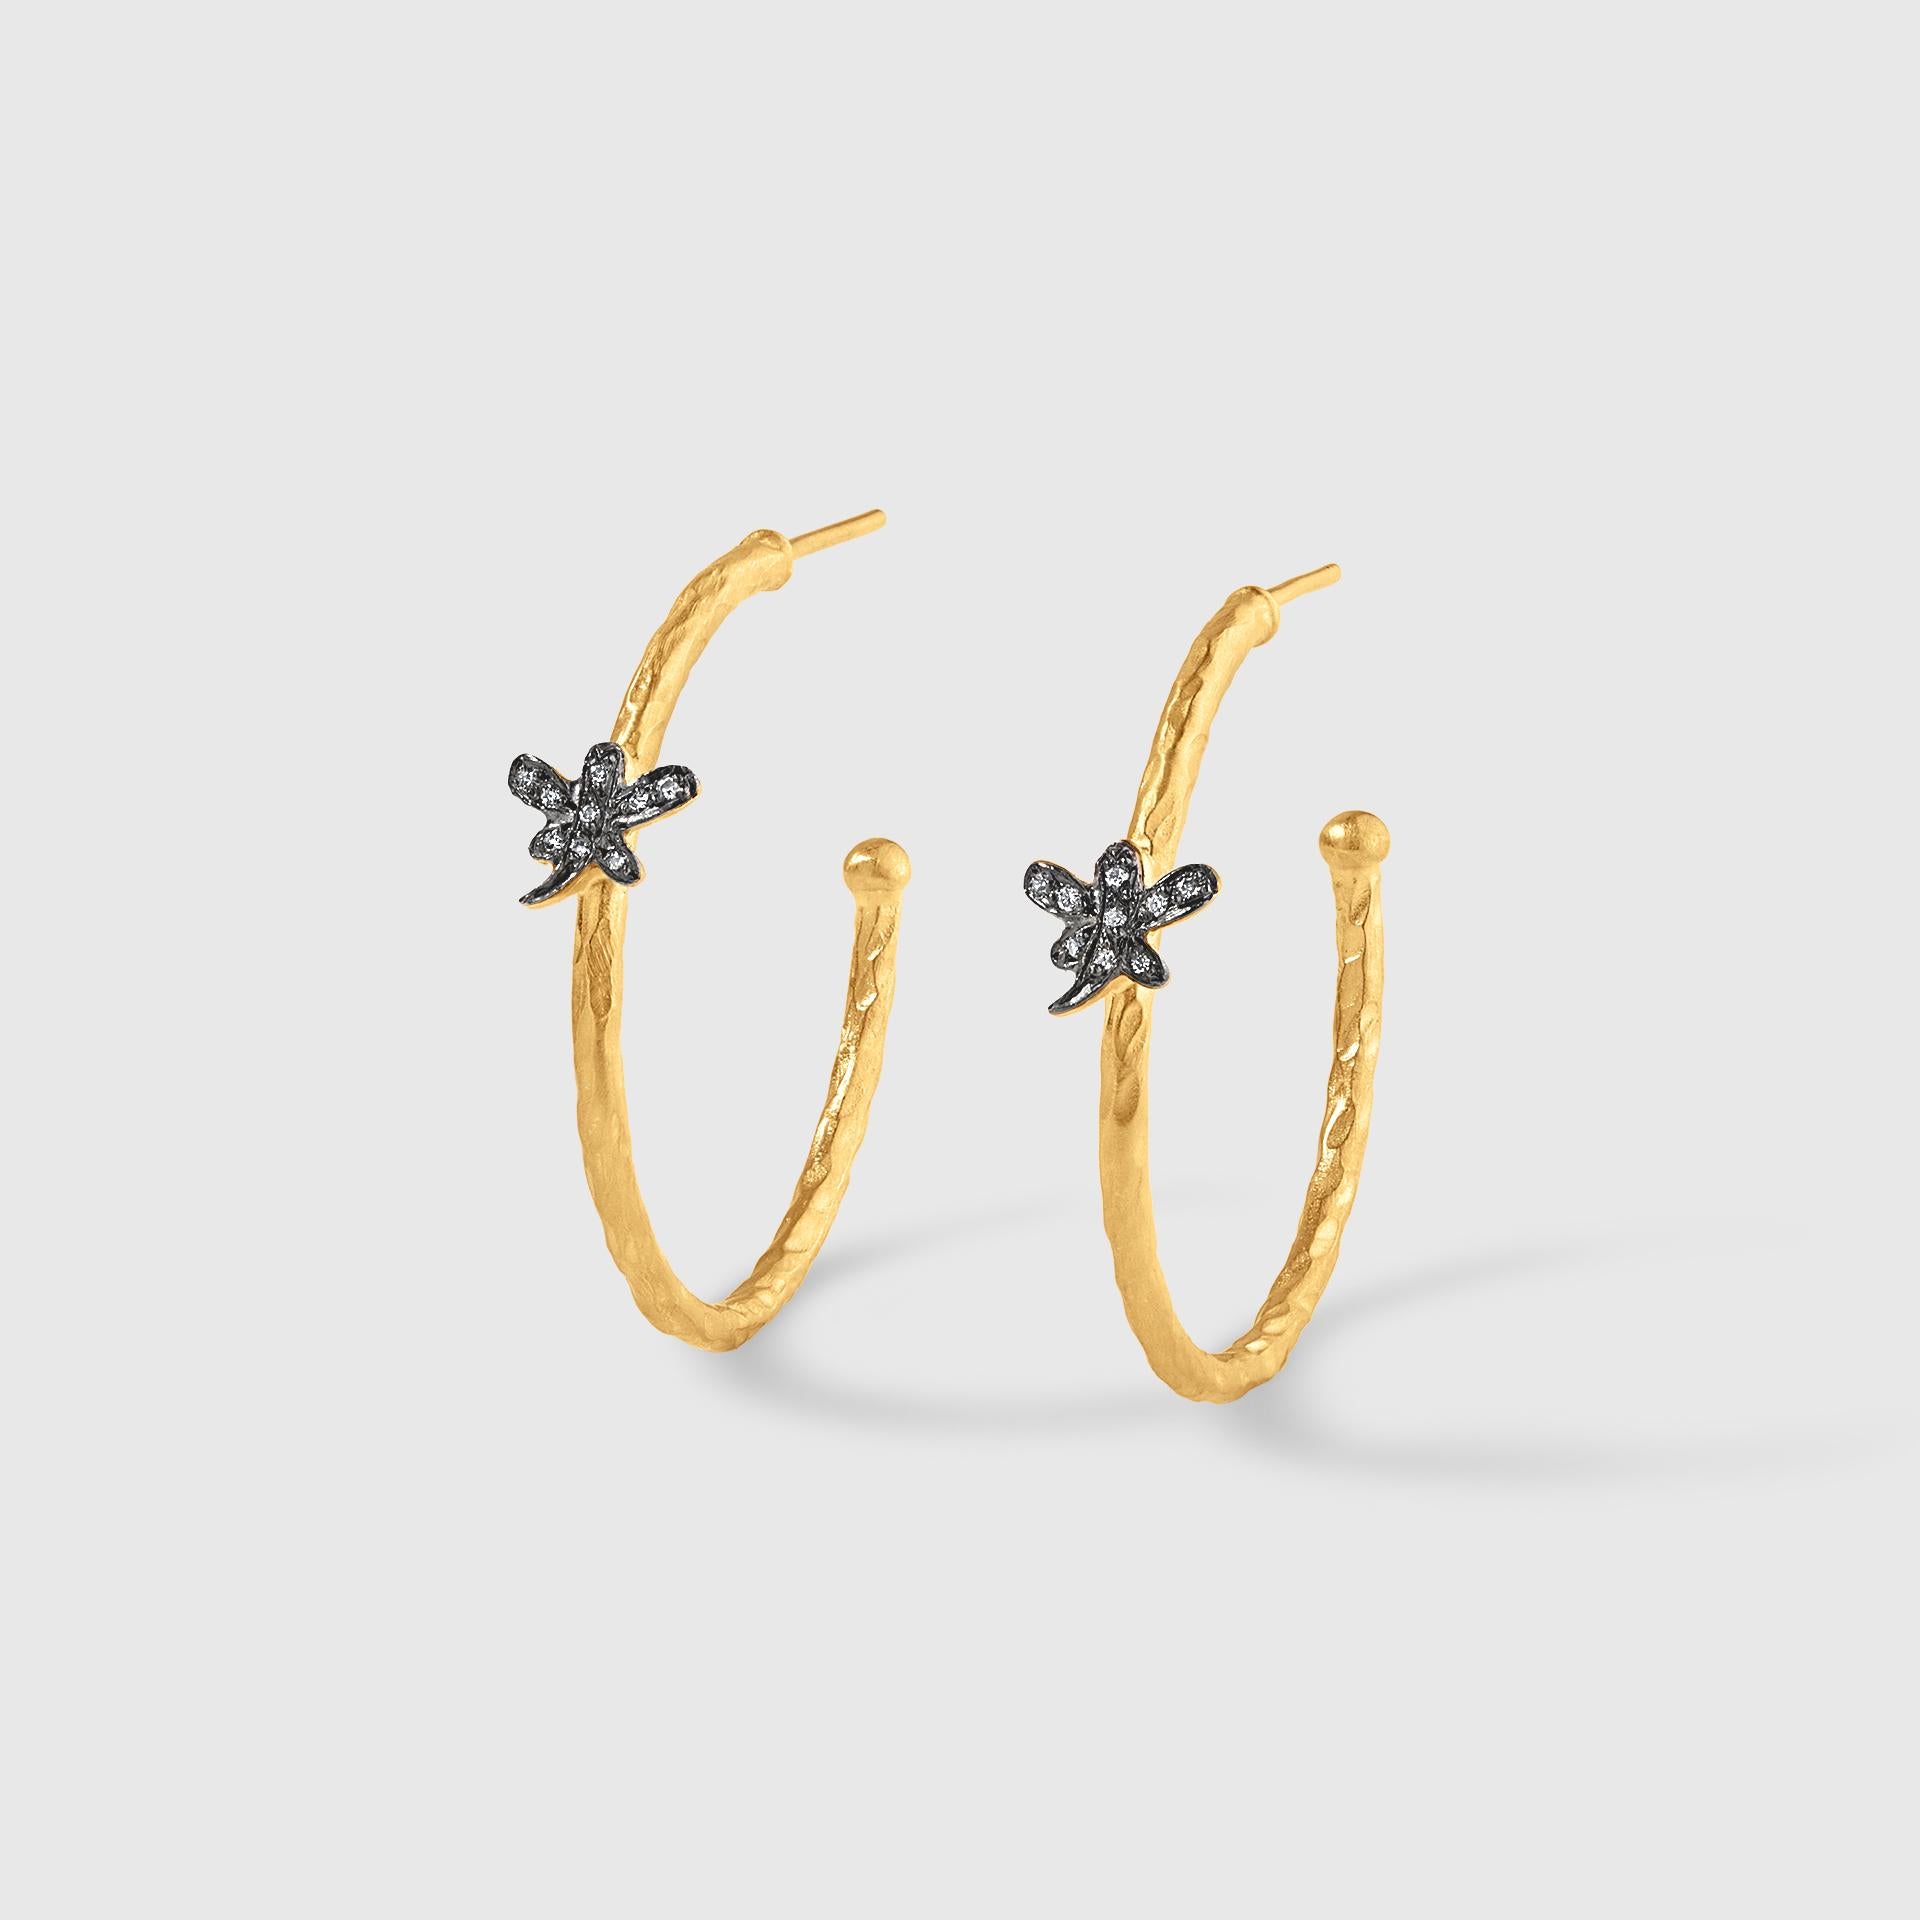 Byzantine Dragonfly Hoop Earrings with Diamonds 24 Kt Yellow Gold and Silver by Kurtulan